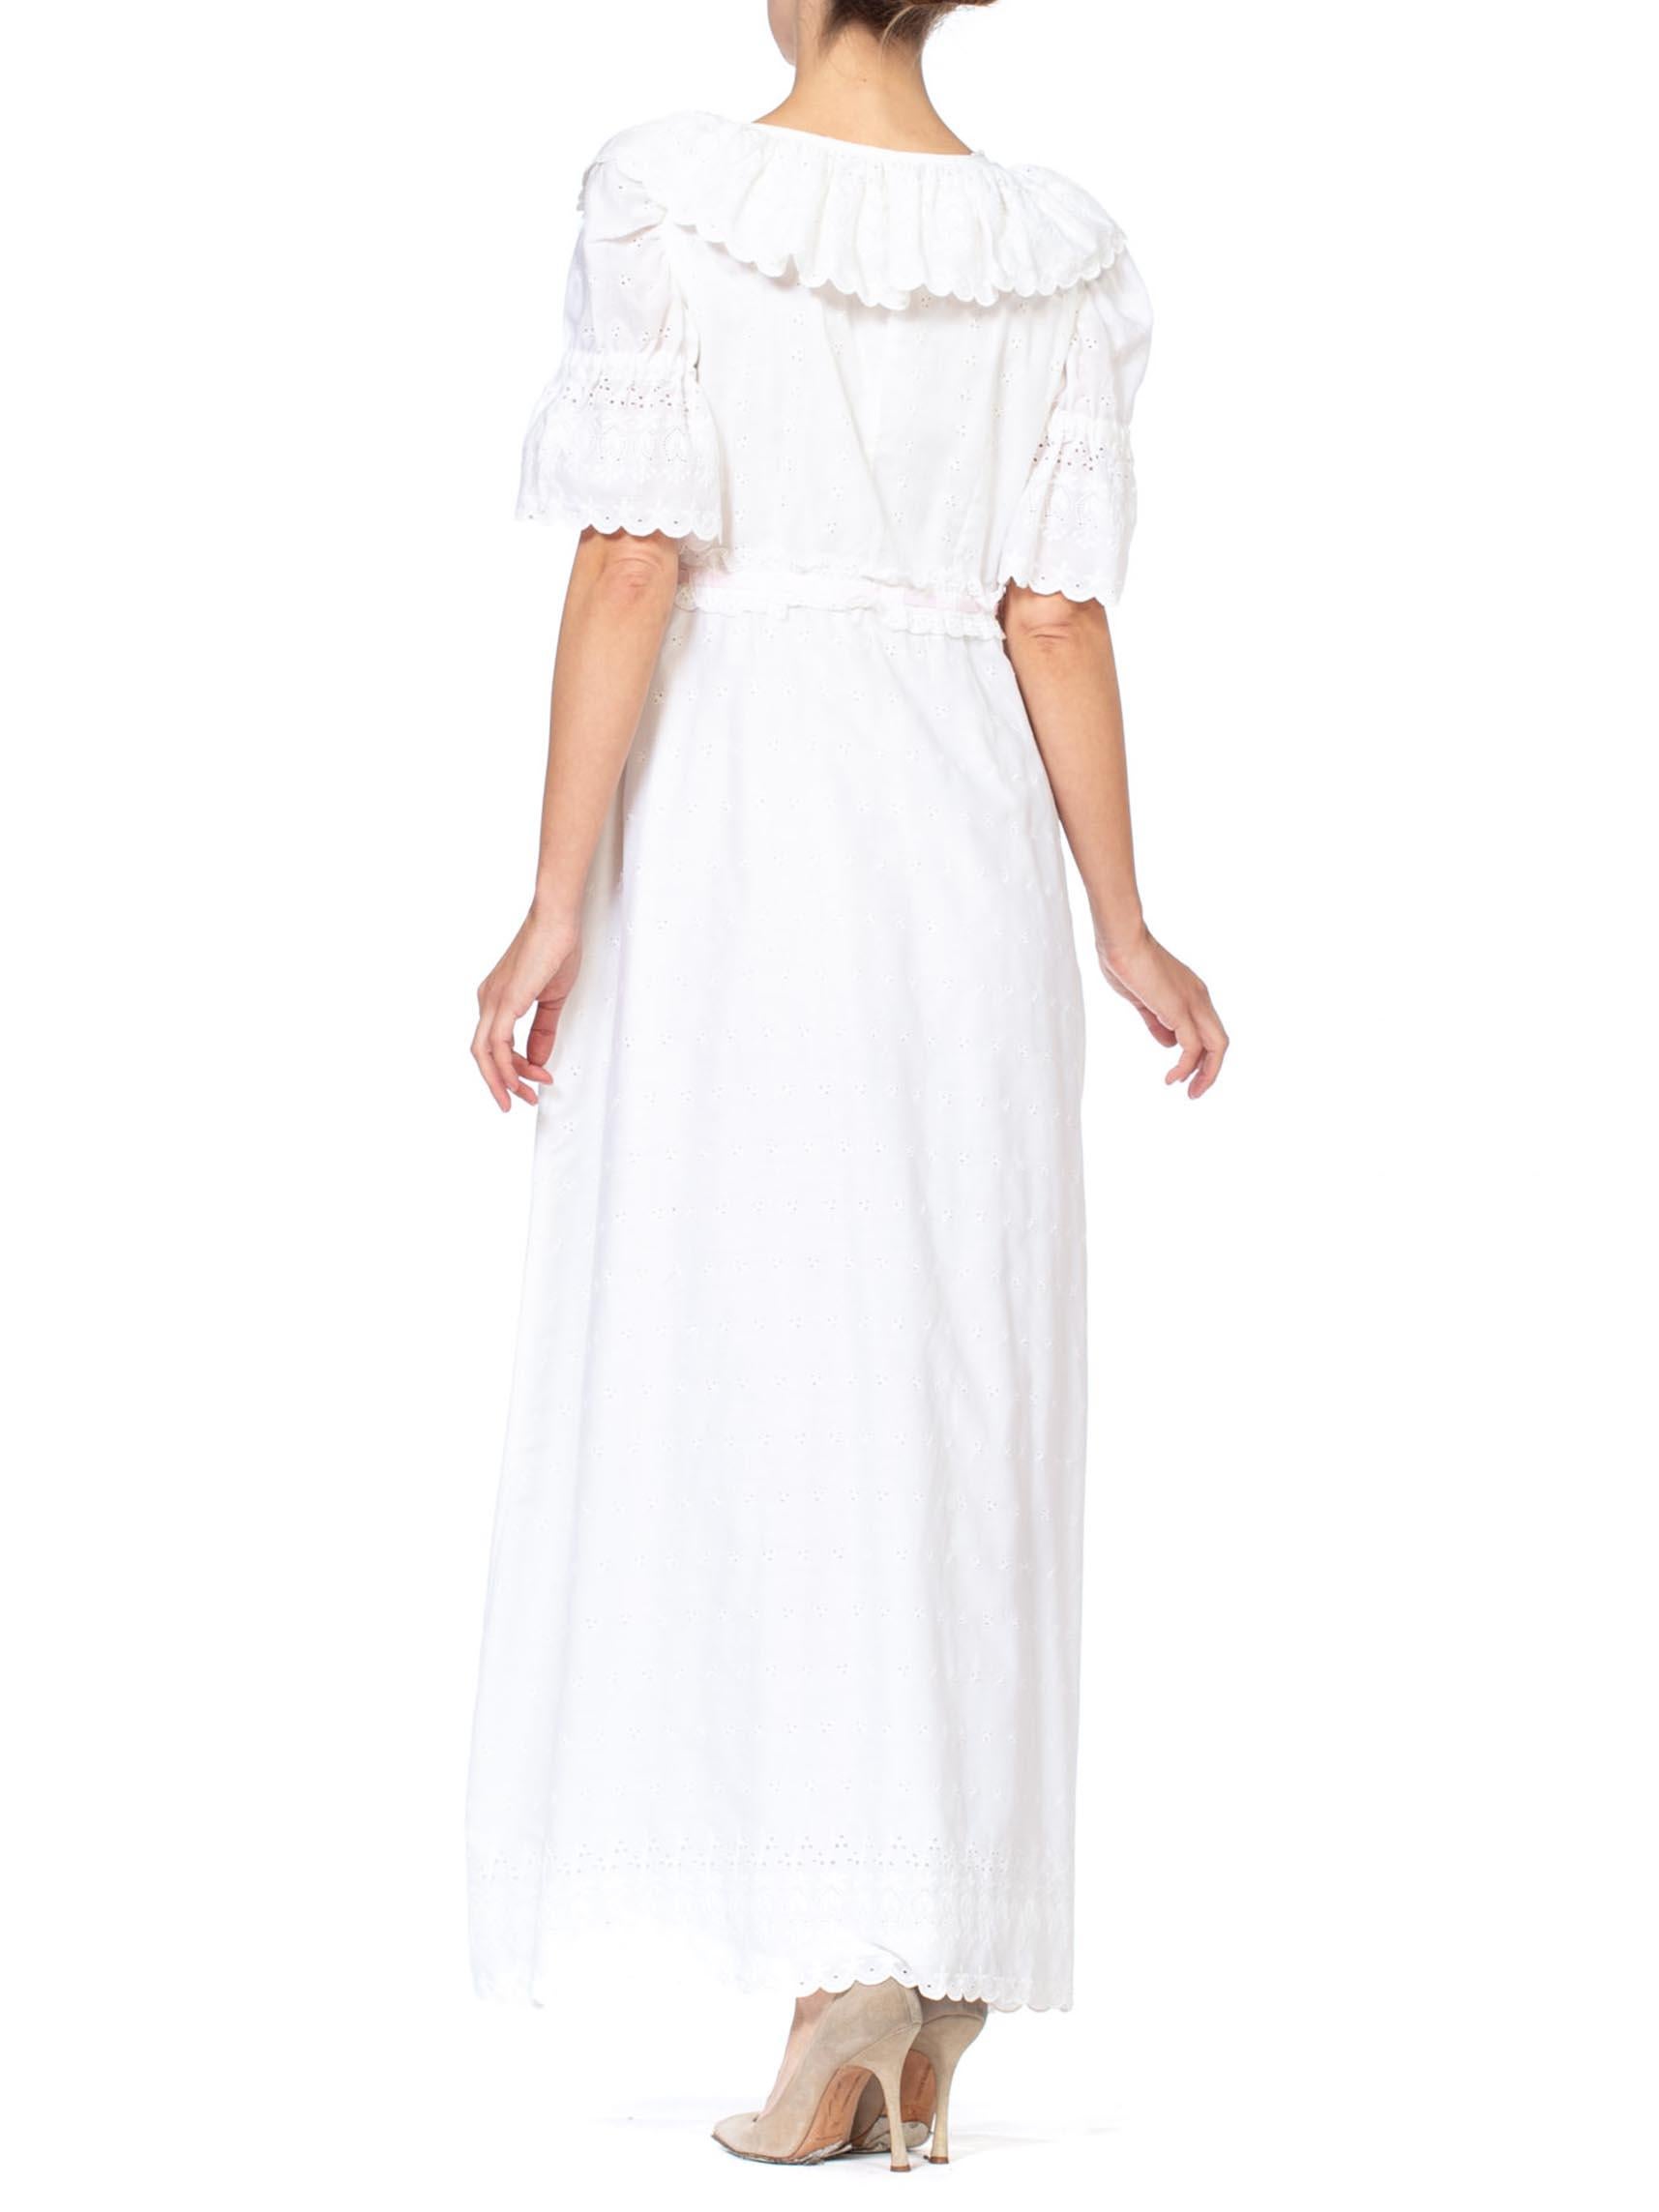 1970S White Embroidered Cotton Blend Eyelet Lace Negligee & Duster Robe Set For Sale 2